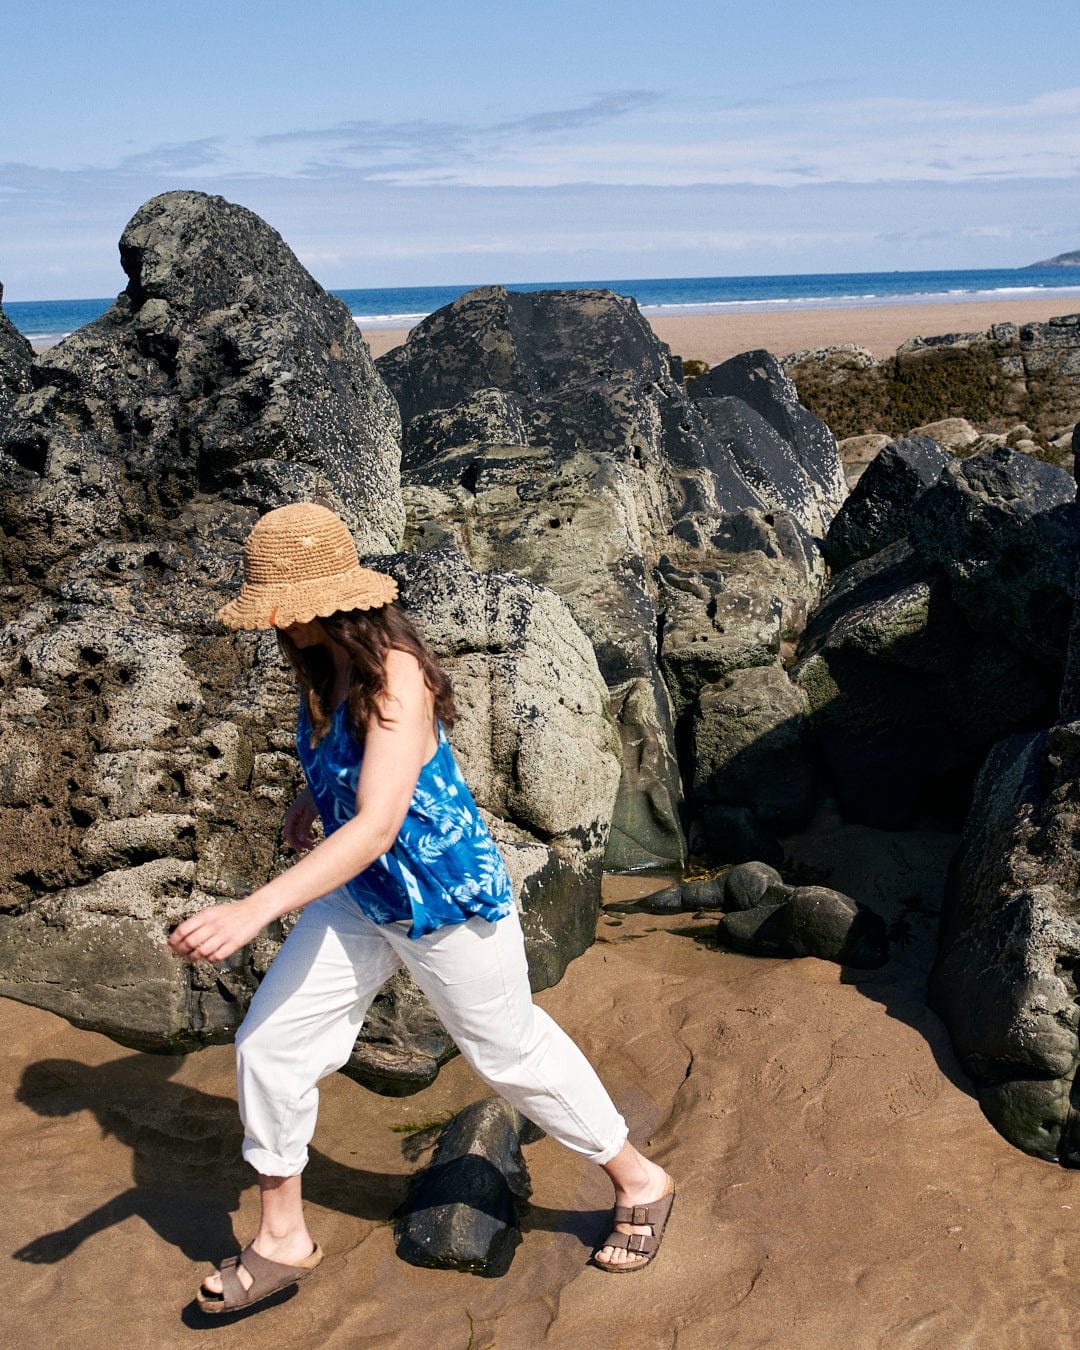 A person in a Saltrock Cyanotype - Womens Cami - Blue, white pants, and a straw hat walks among large rocks on a sandy beach with a view of the ocean in the background.